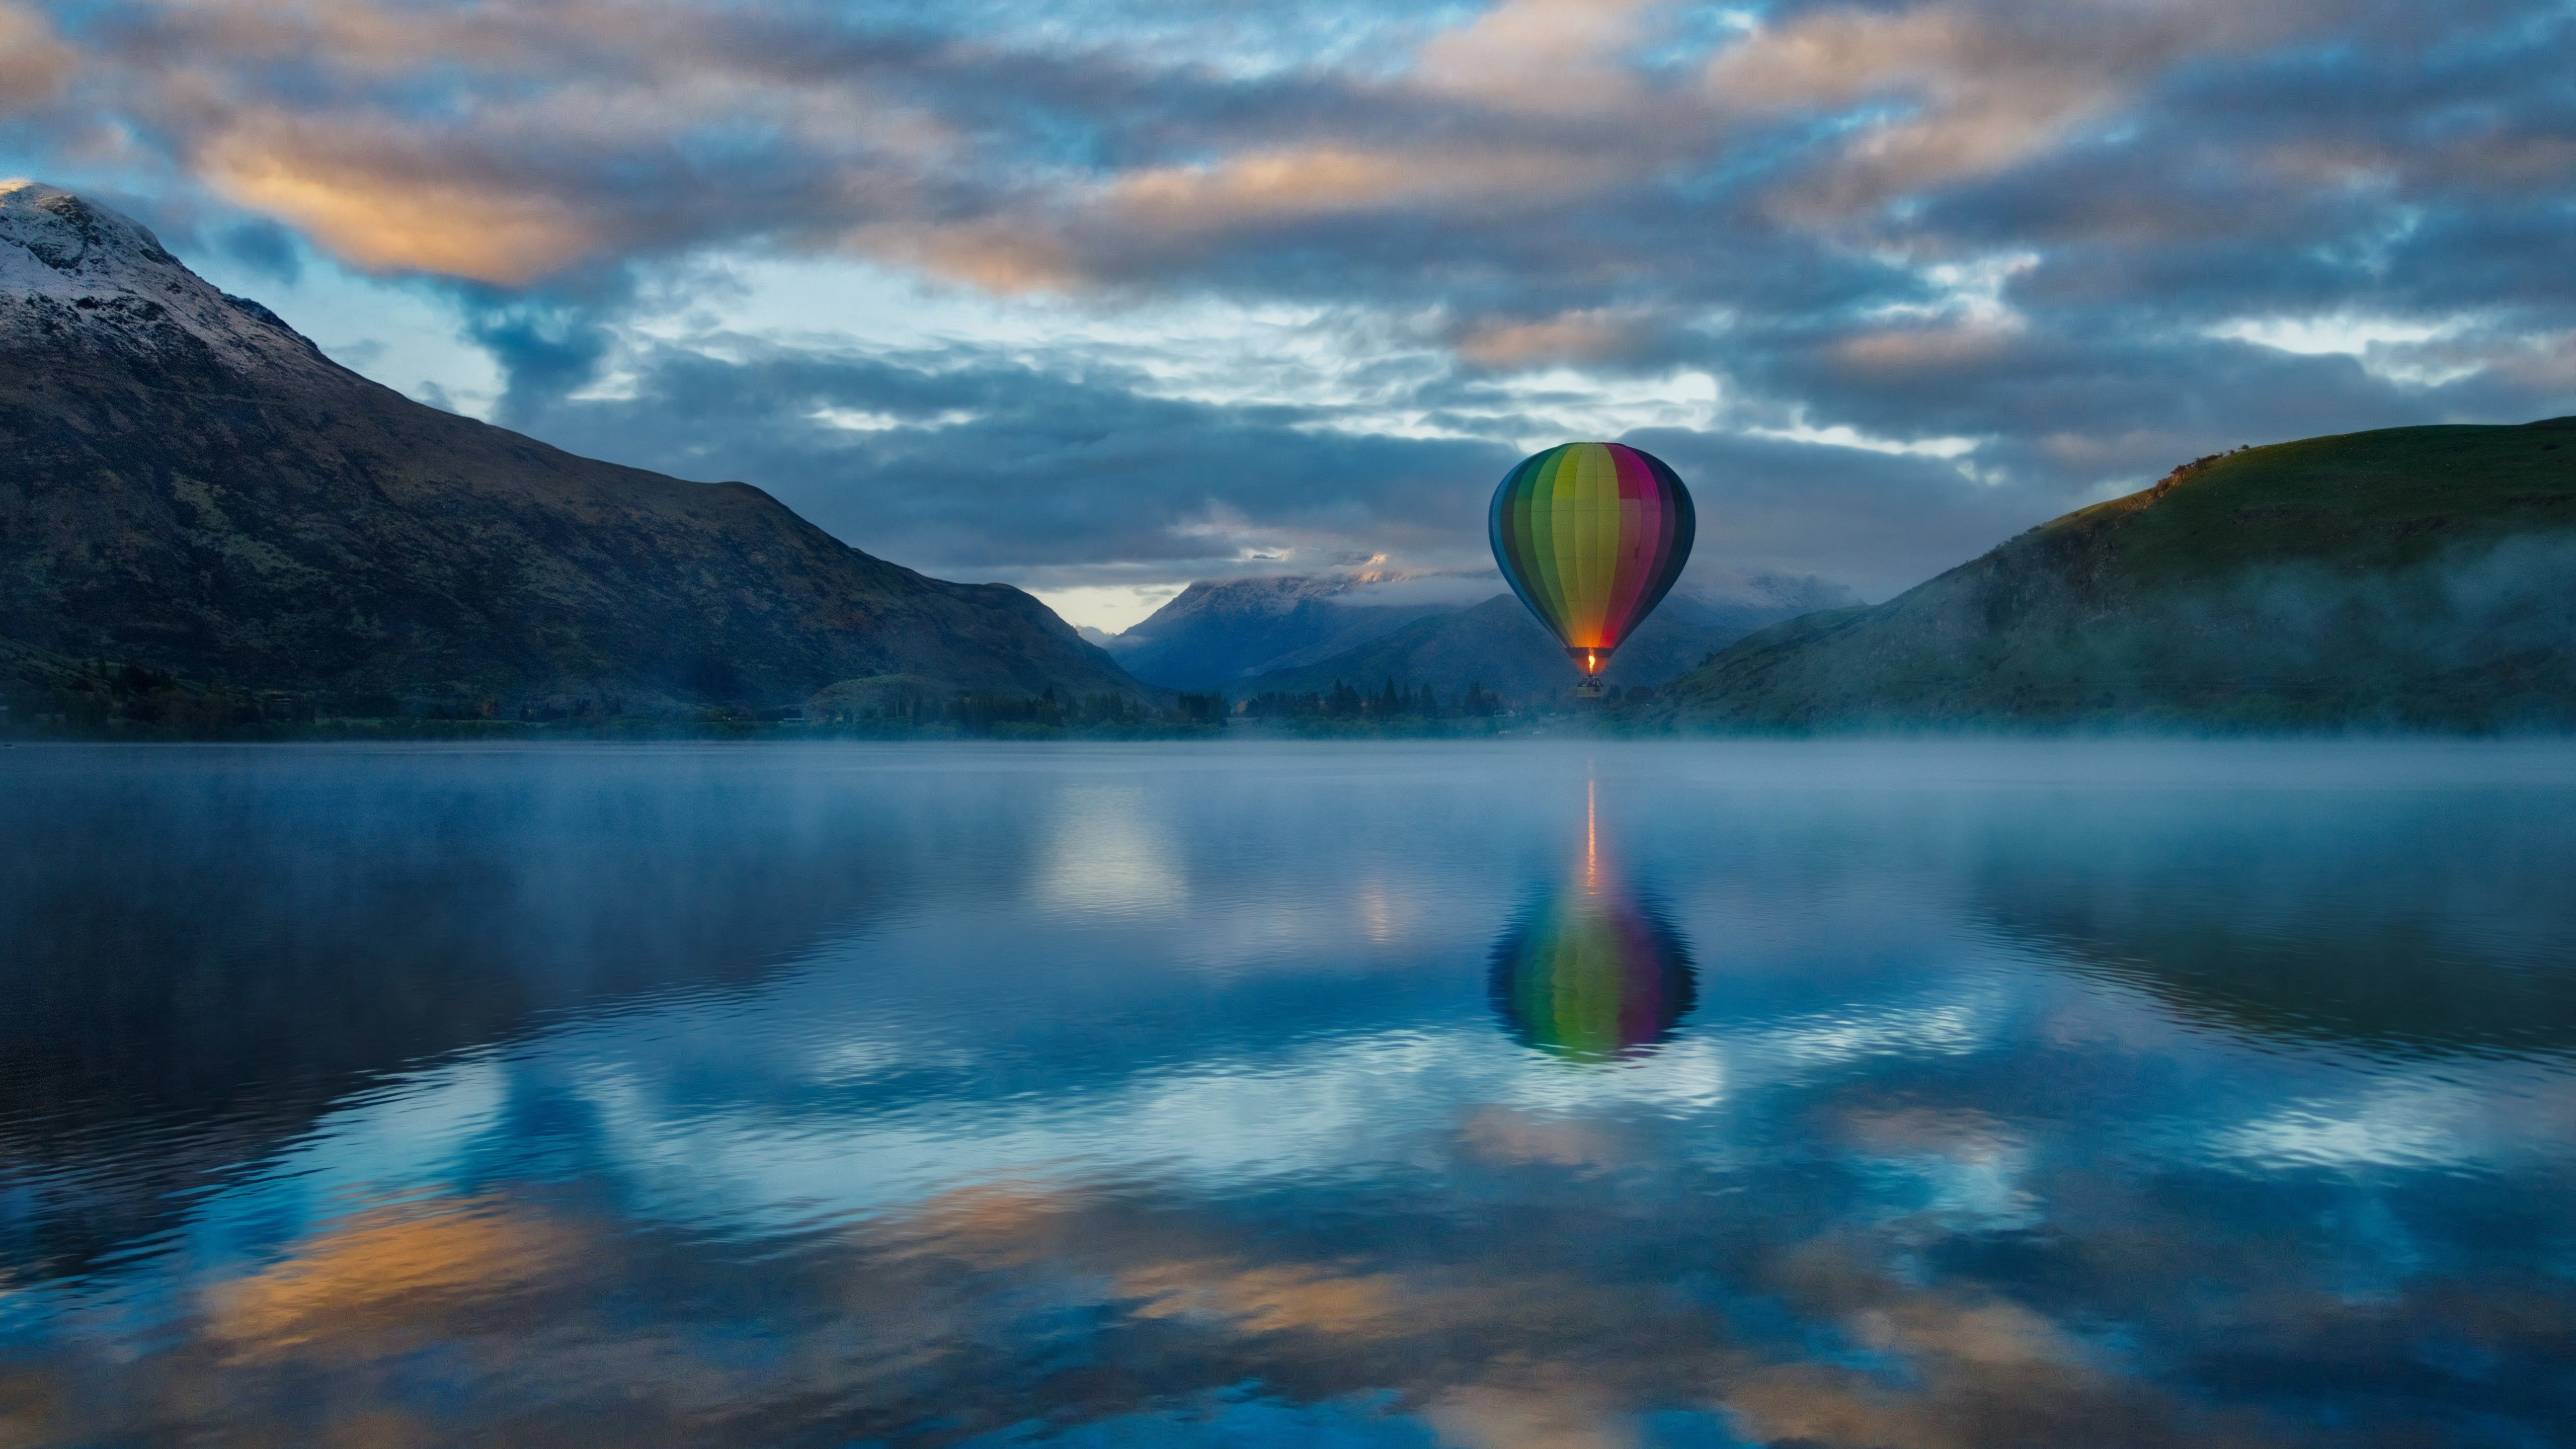 Hot air balloon 4K Wallpaper, Lake Hayes, Queenstown, New Zealand, Mountains, Clouds, Reflection, Nature